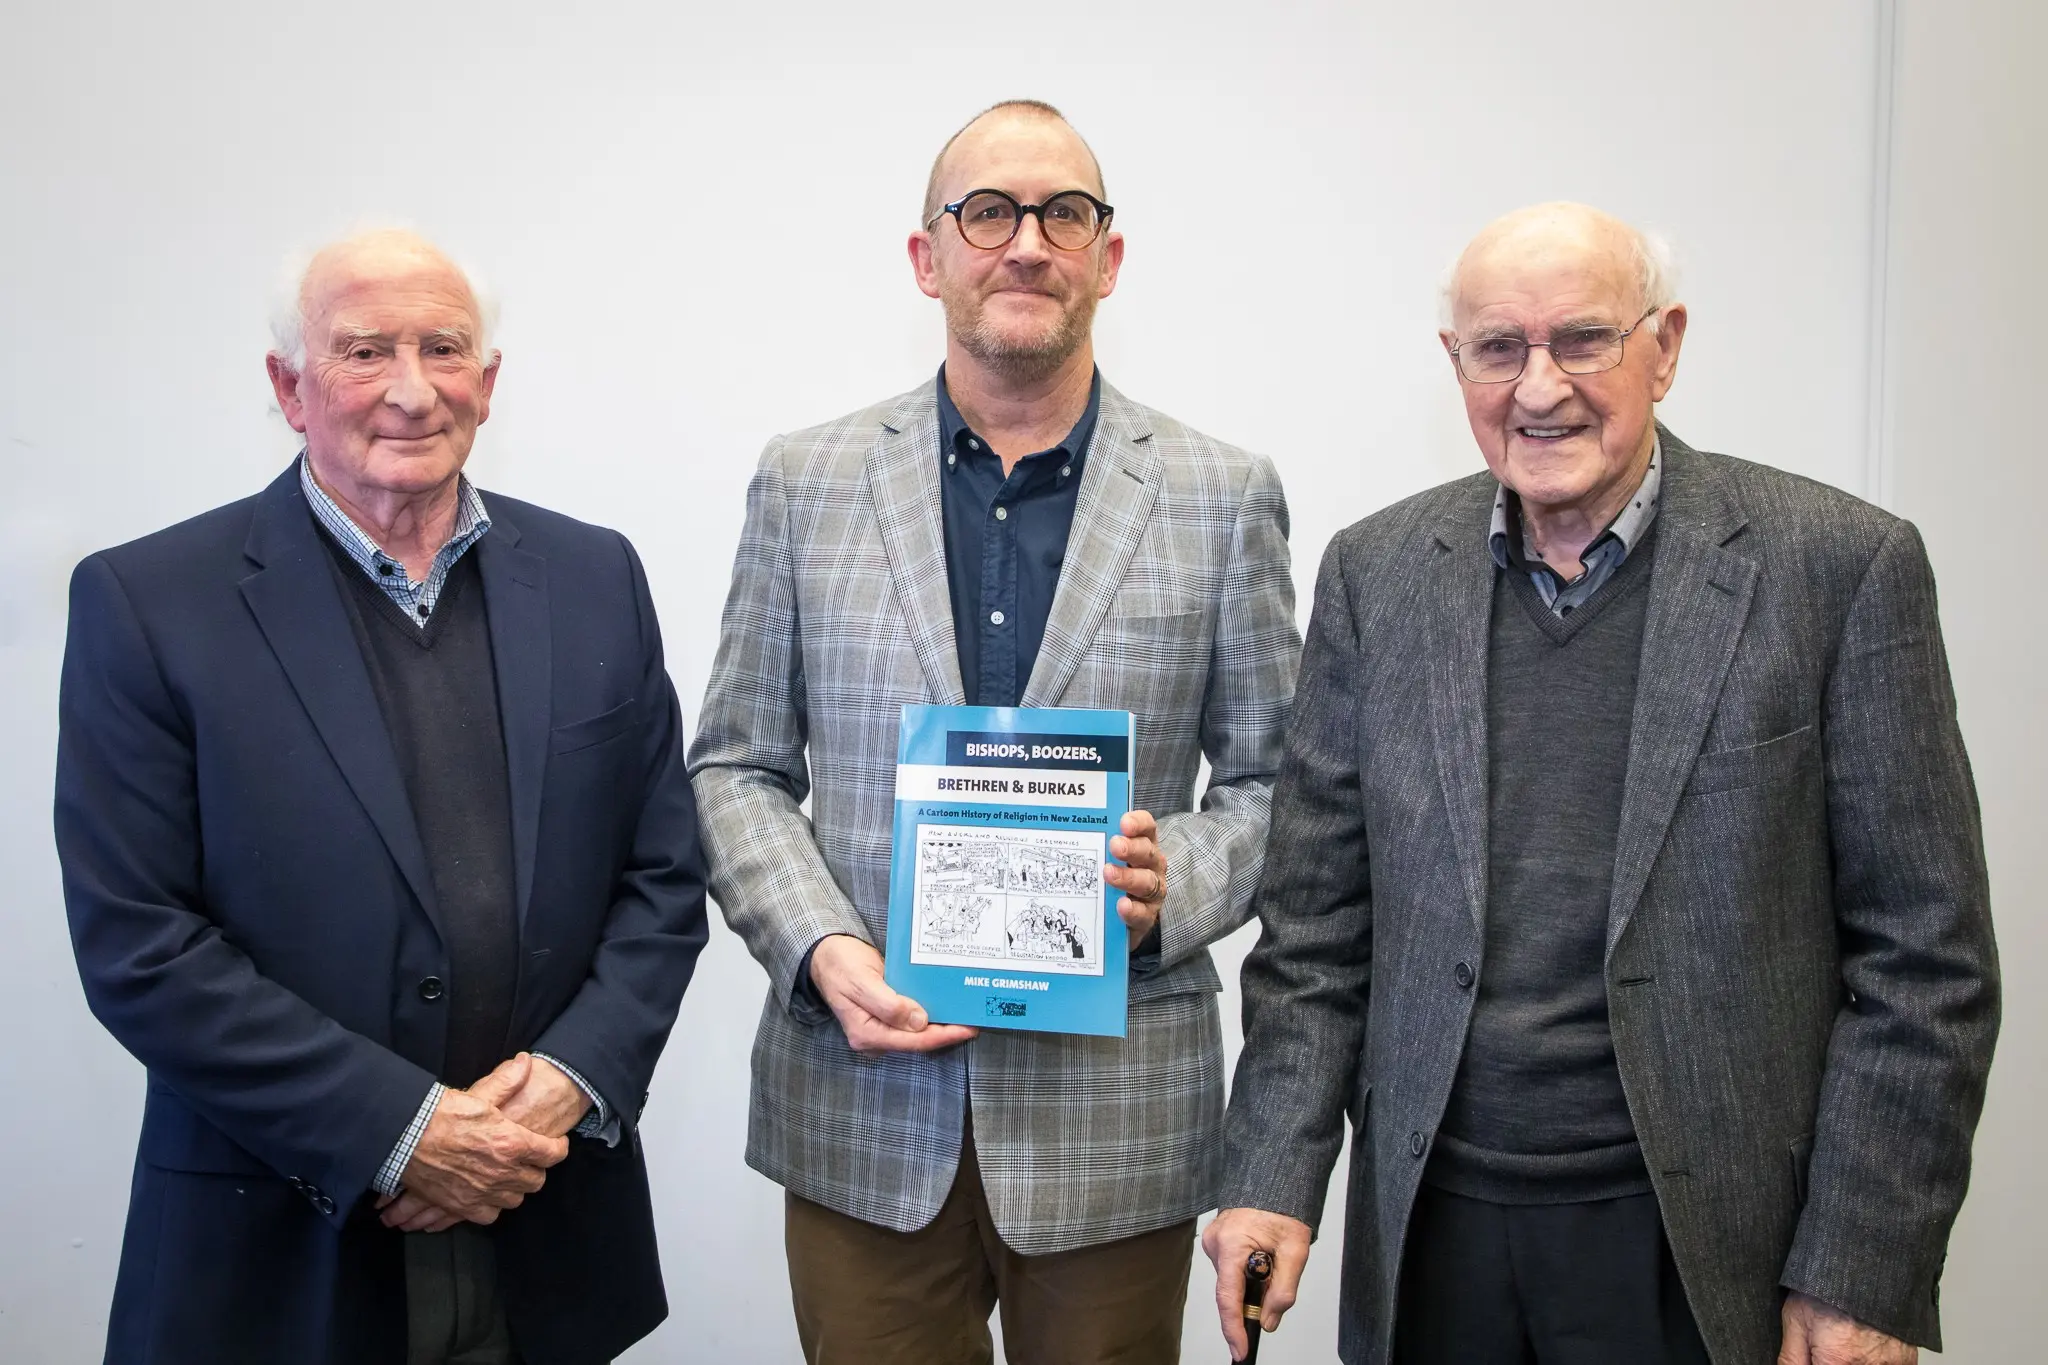 Sir Lloyd Geering (right) with author Mike Grimshaw (centre) and Ian Grant, publisher.